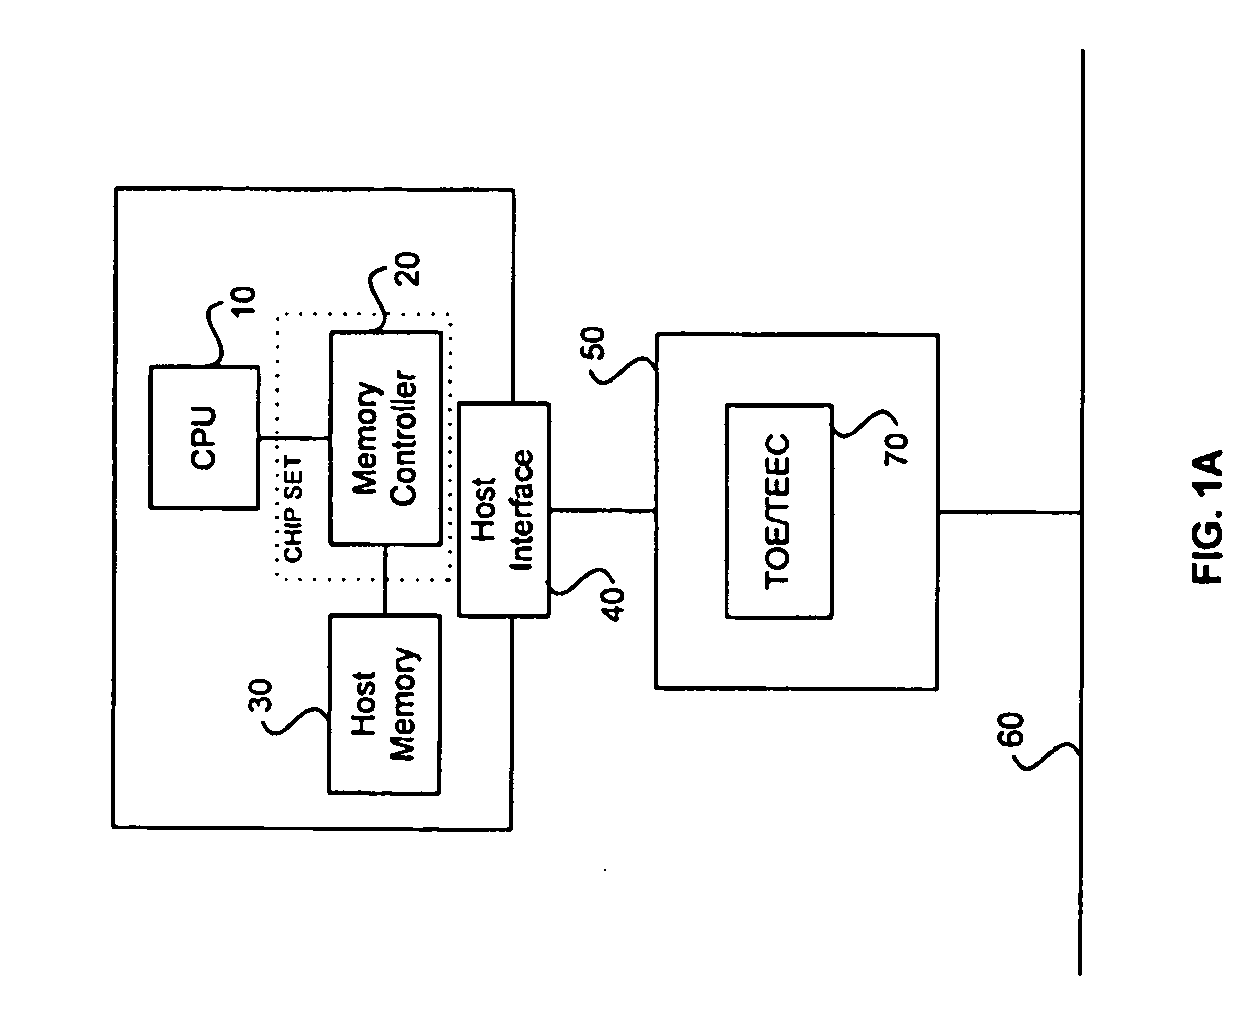 System and method for handling out-of-order frames